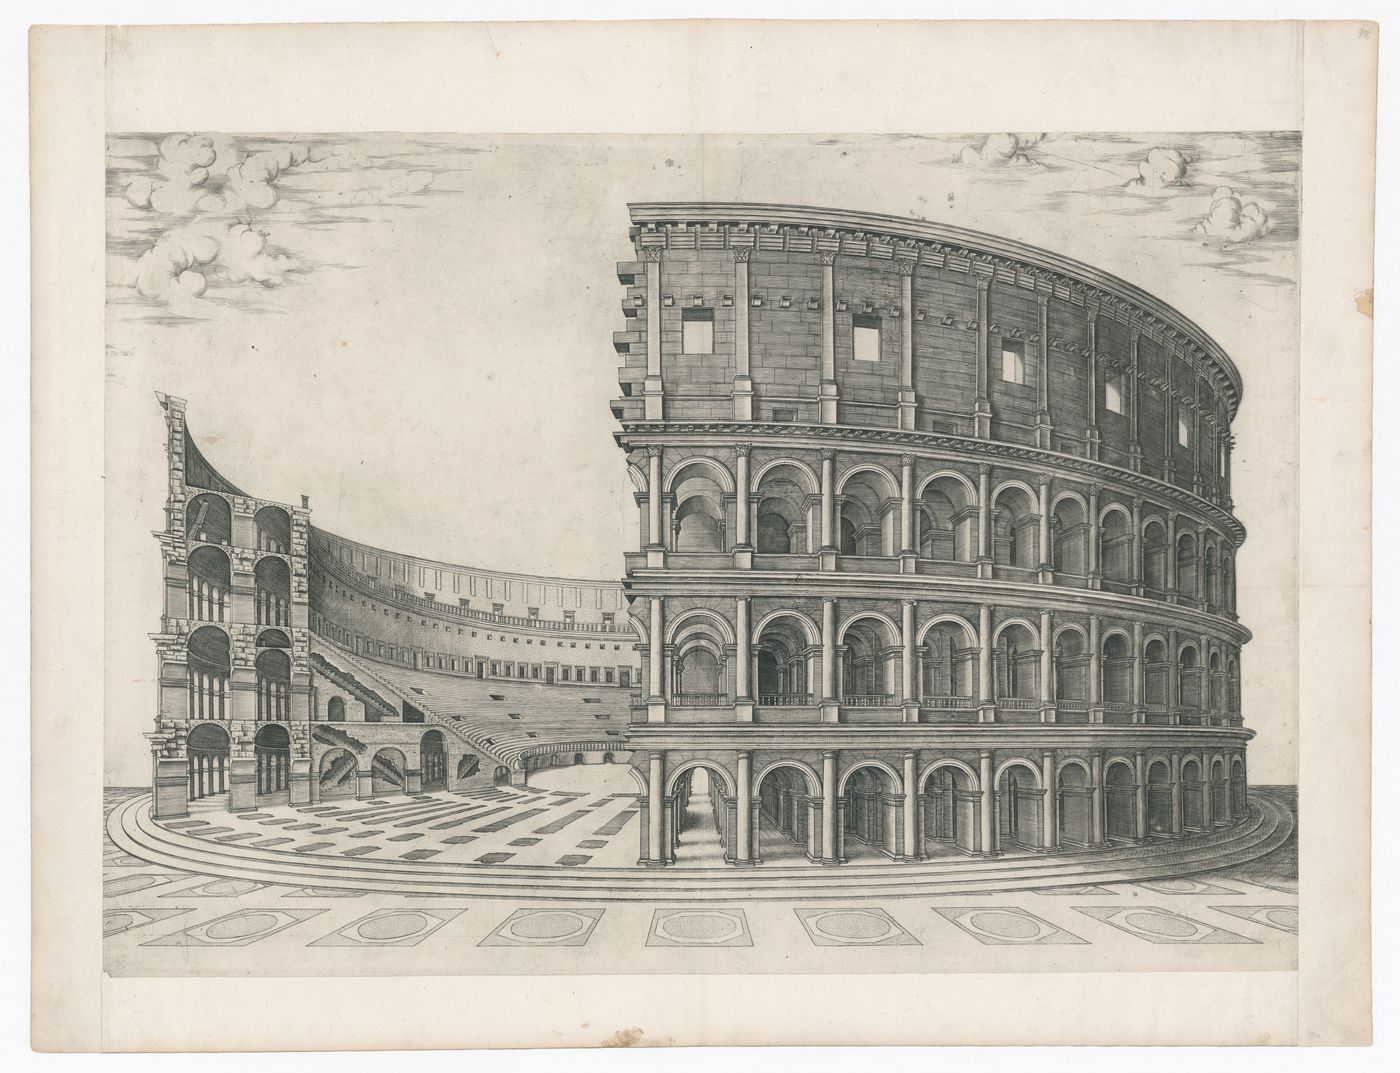 Cutaway perspective reconstruction of the Colosseum, Rome